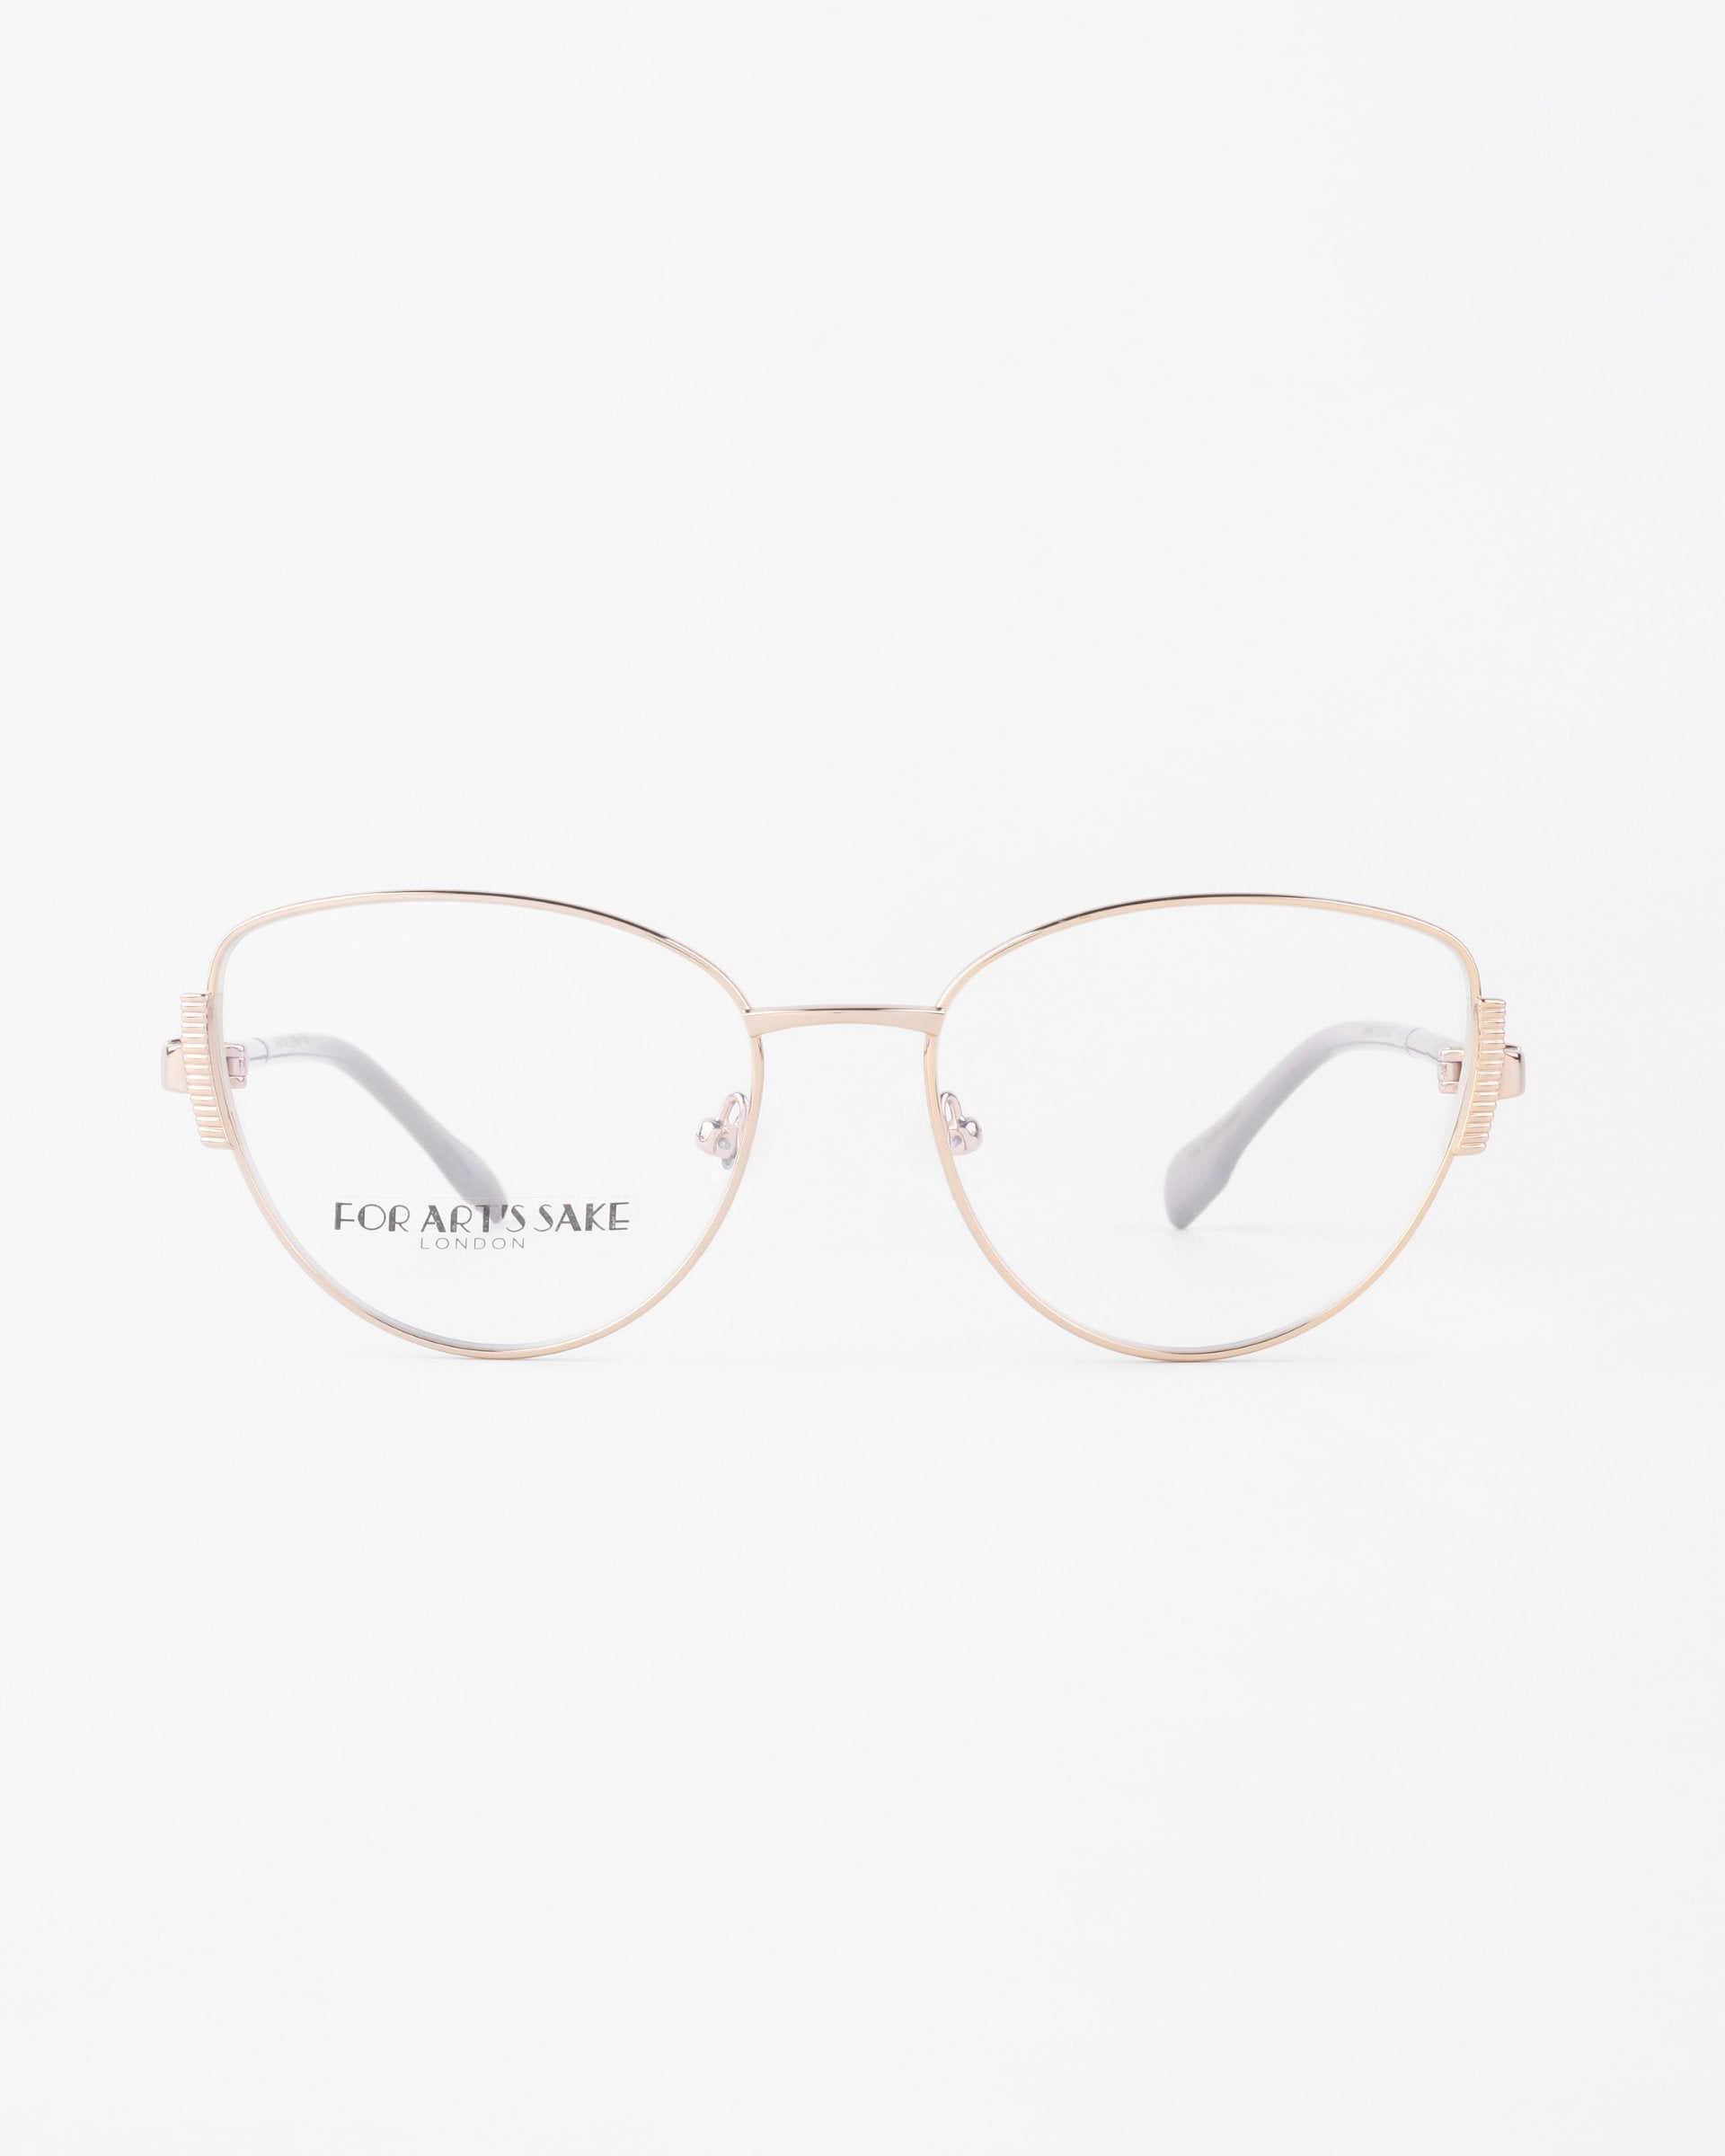 A pair of delicate, gold-framed eyeglasses with round lenses and prescription lenses. The frames are thin and minimalistic, with a slight cat-eye shape and jade stone nose pads. The words &quot;For Art&#39;s Sake®&quot; are etched on the left lens. The background is white.